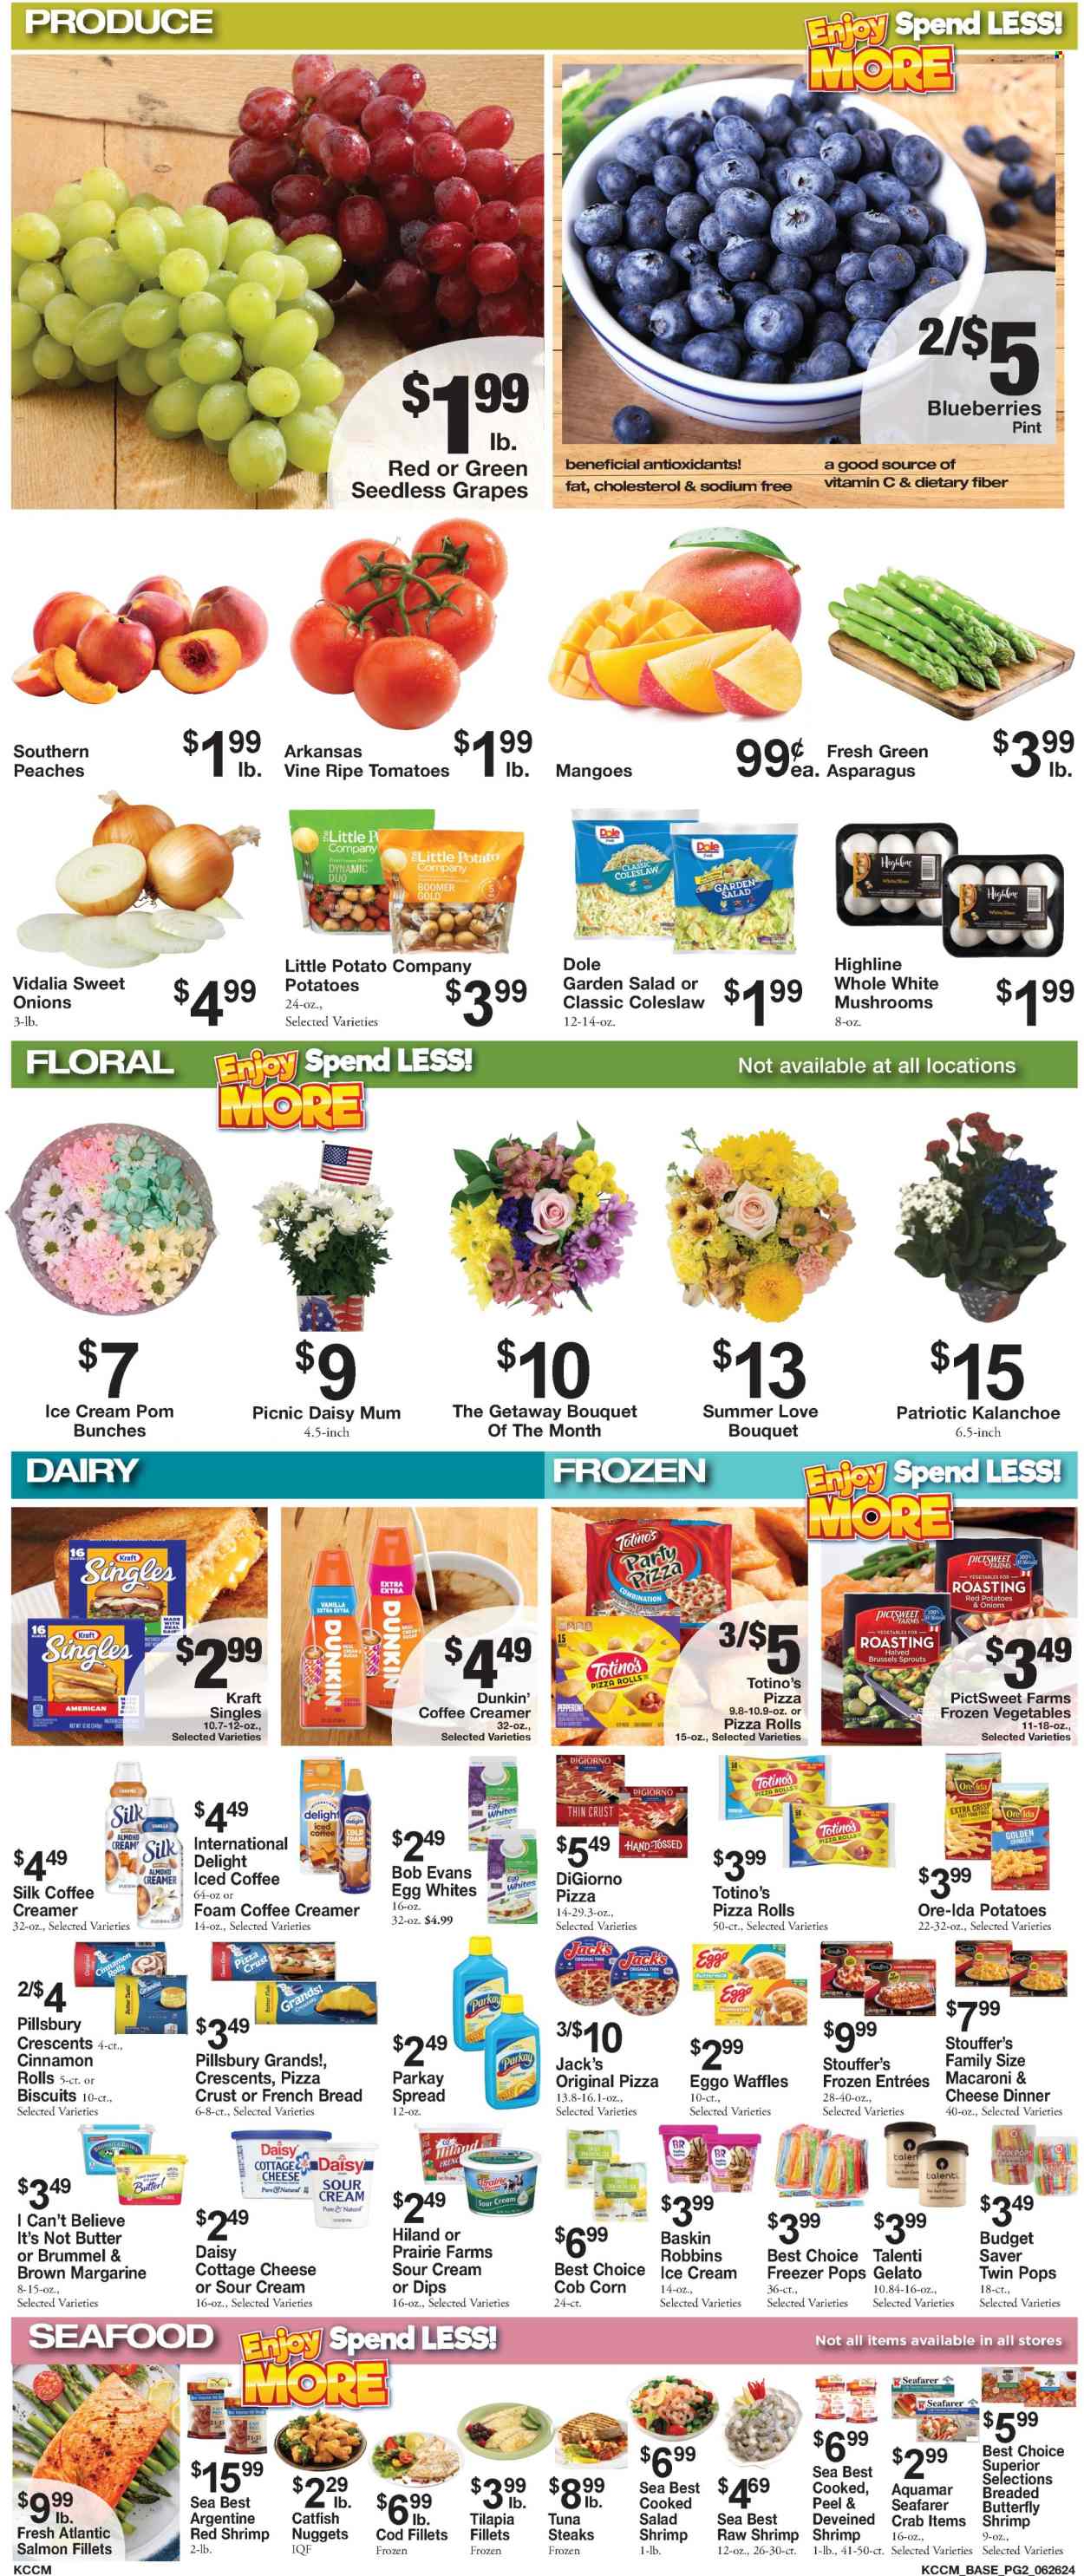 thumbnail - Bratchers Market Flyer - 06/26/2024 - 07/09/2024 - Sales products - bread, pizza rolls, cinnamon roll, crescent rolls, waffles, coleslaw, salad greens, onion, salad, Dole, brussel sprouts, sweet corn, red potatoes, grapes, seedless grapes, peaches, catfish, cod, fish fillets, salmon, salmon fillet, tilapia, tuna, seafood, crab, shrimps, fish nuggets, catfish nuggets, macaroni & cheese, pizza, pasta, Pillsbury, lasagna meal, Kraft®, Bob Evans, ready meal, cottage cheese, sandwich slices, Kraft Singles, Silk, eggs, margarine, I Can't Believe It's Not Butter, sour cream, coffee and tea creamer, pizza dough, refrigerated dough, ice cream, ice cream bars, Talenti Gelato, gelato, popsicle, frozen vegetables, Stouffer's, potato fries, Ore-Ida, biscuit, topping, iced coffee, coffee drink, chicken, steak, bunches, bouquet, houseplant, kalanchoe, vitamin c. Page 2.